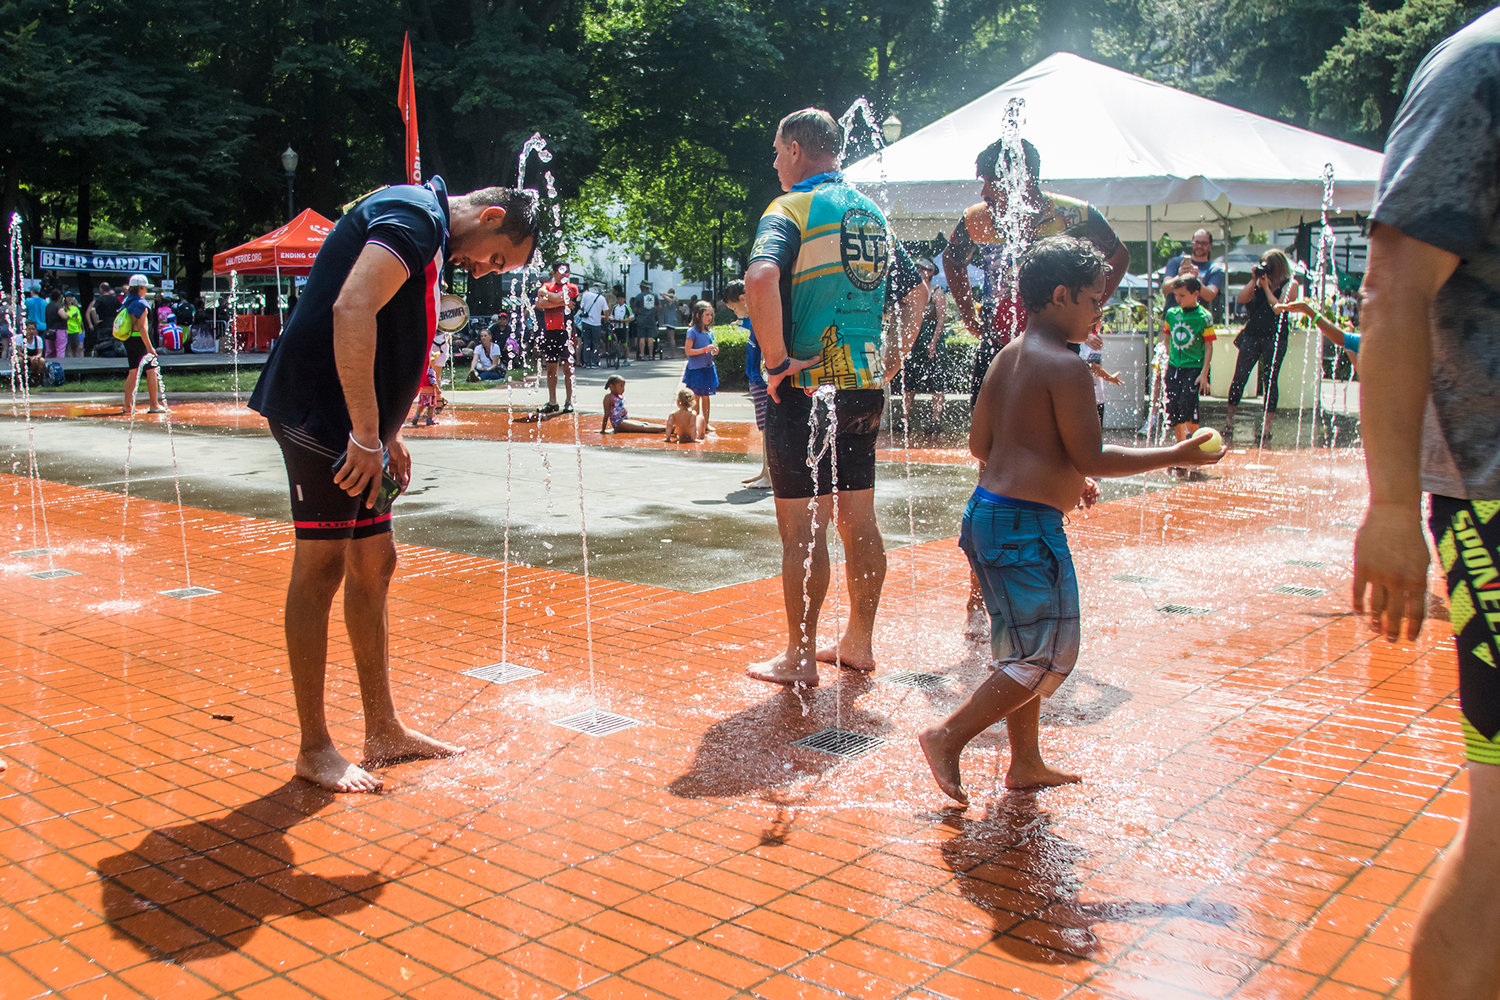 STP finishers rinse off in a nearby water park Sunday afternoon at Holladay Park in Portland, Oregon.